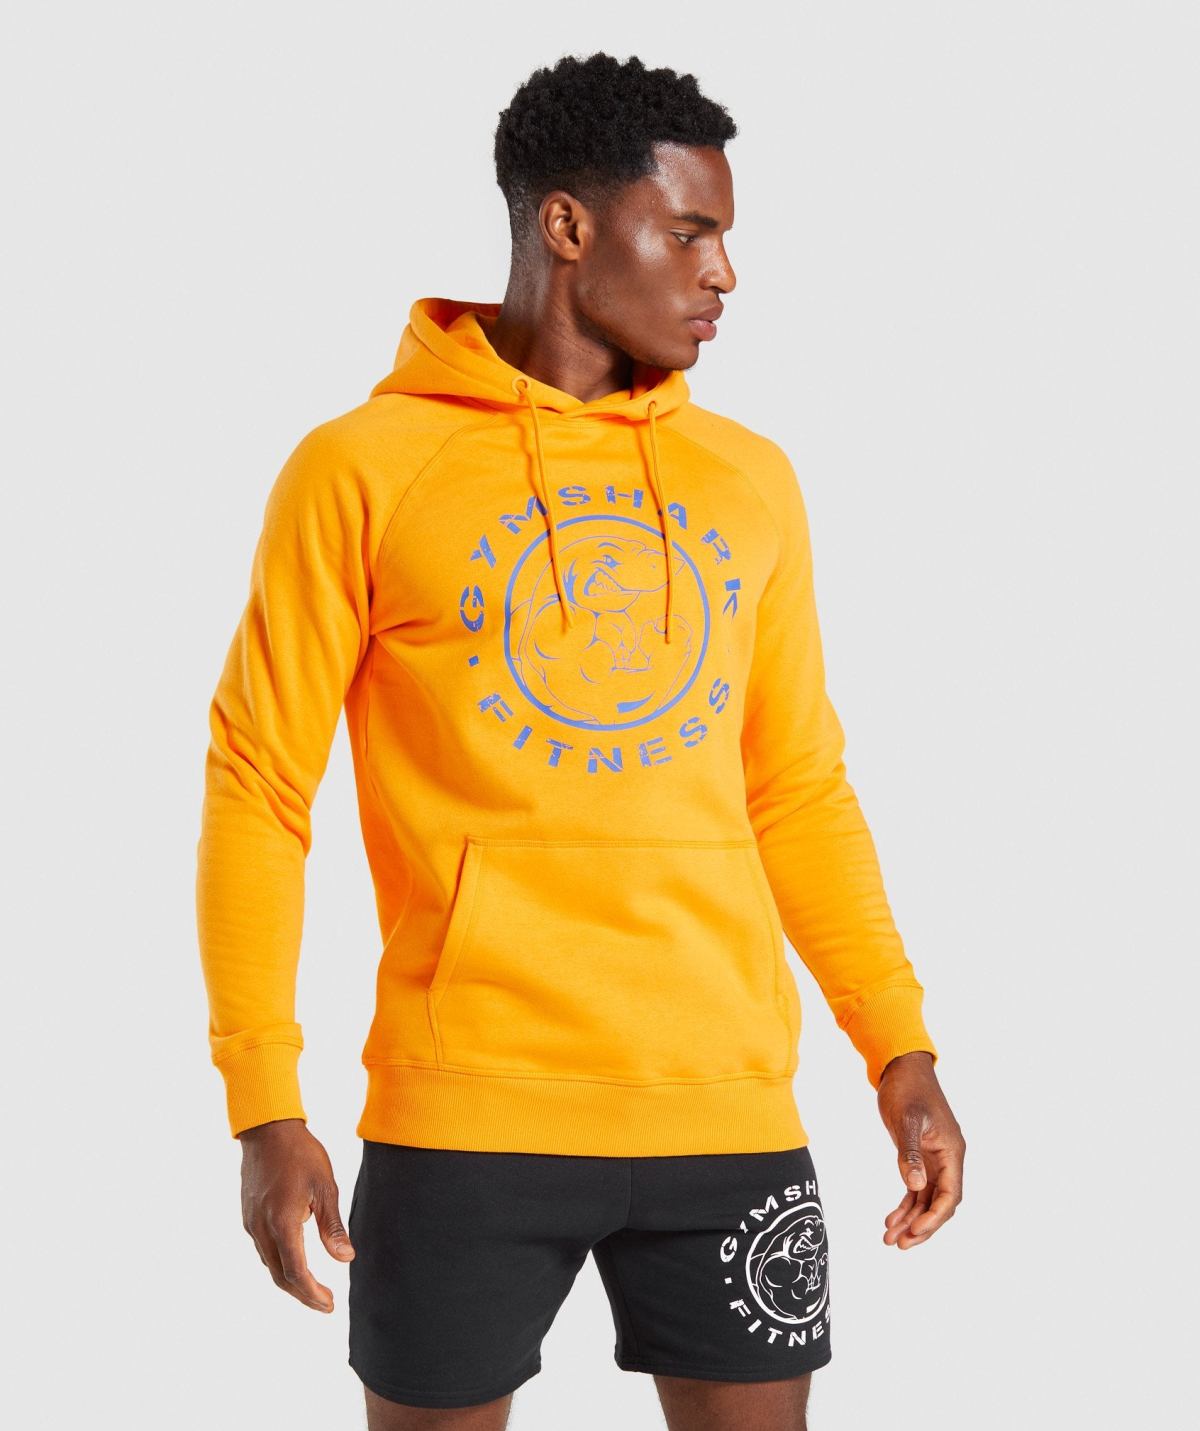 Soft and Breathable Gymshark Hoodies for Optimal Comfort